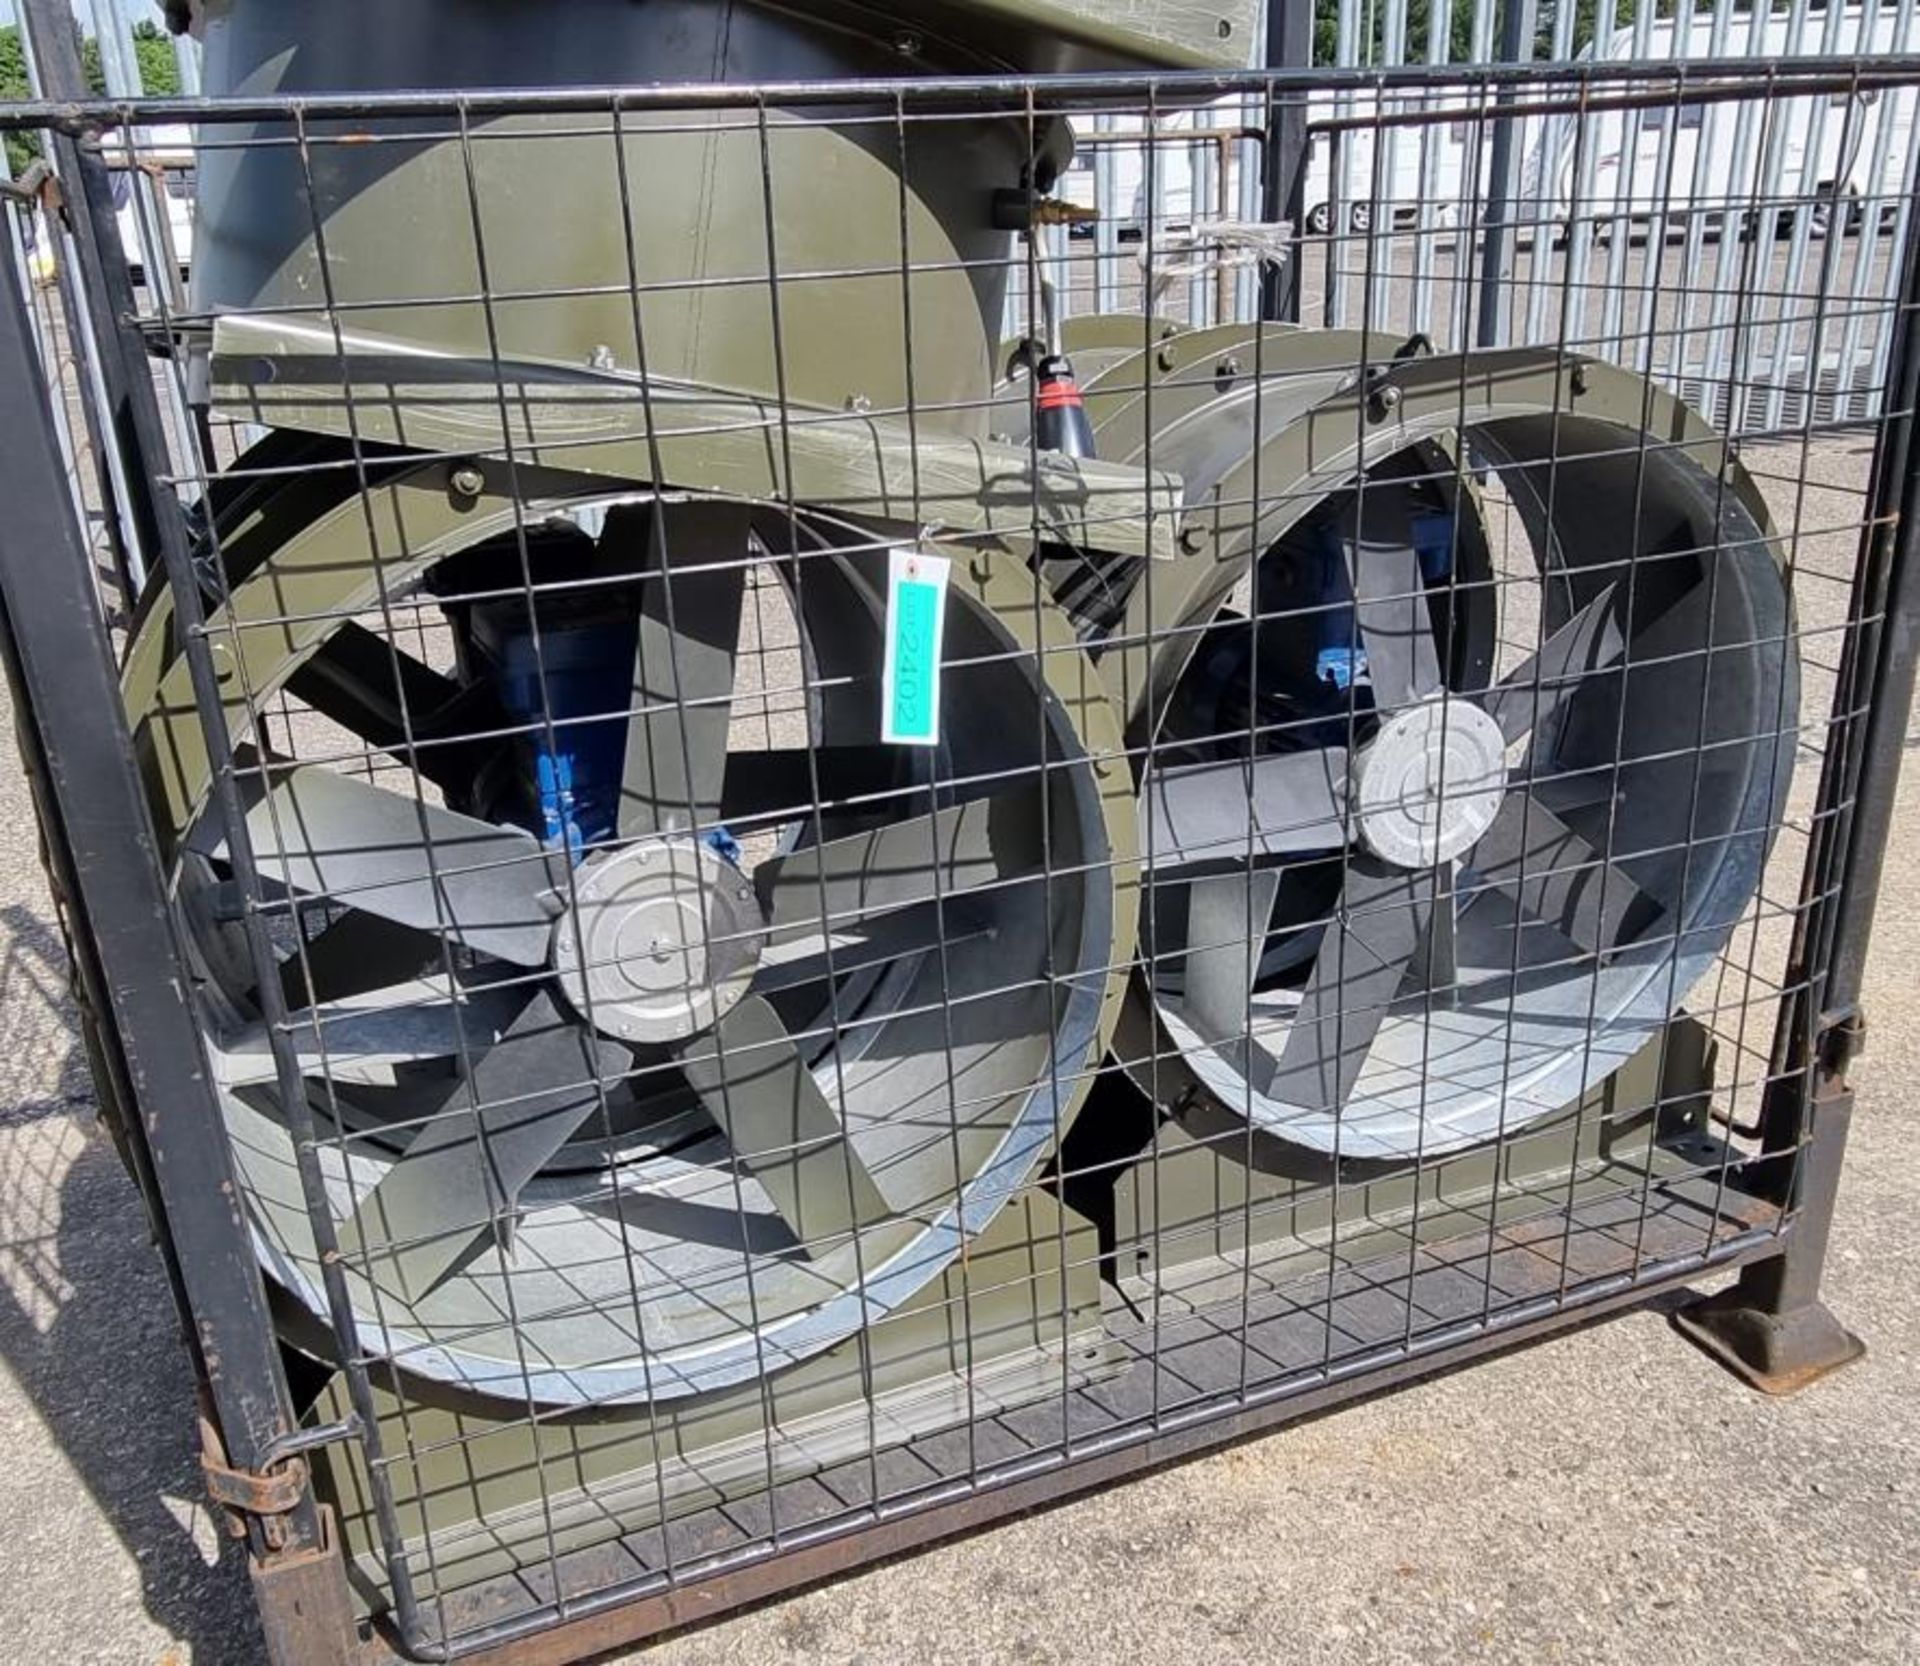 5x RUBB / ED / 332 industrial fan units - 415V / 3ph / 50hz with ATX PCX connectors with WEG motors - Image 2 of 9